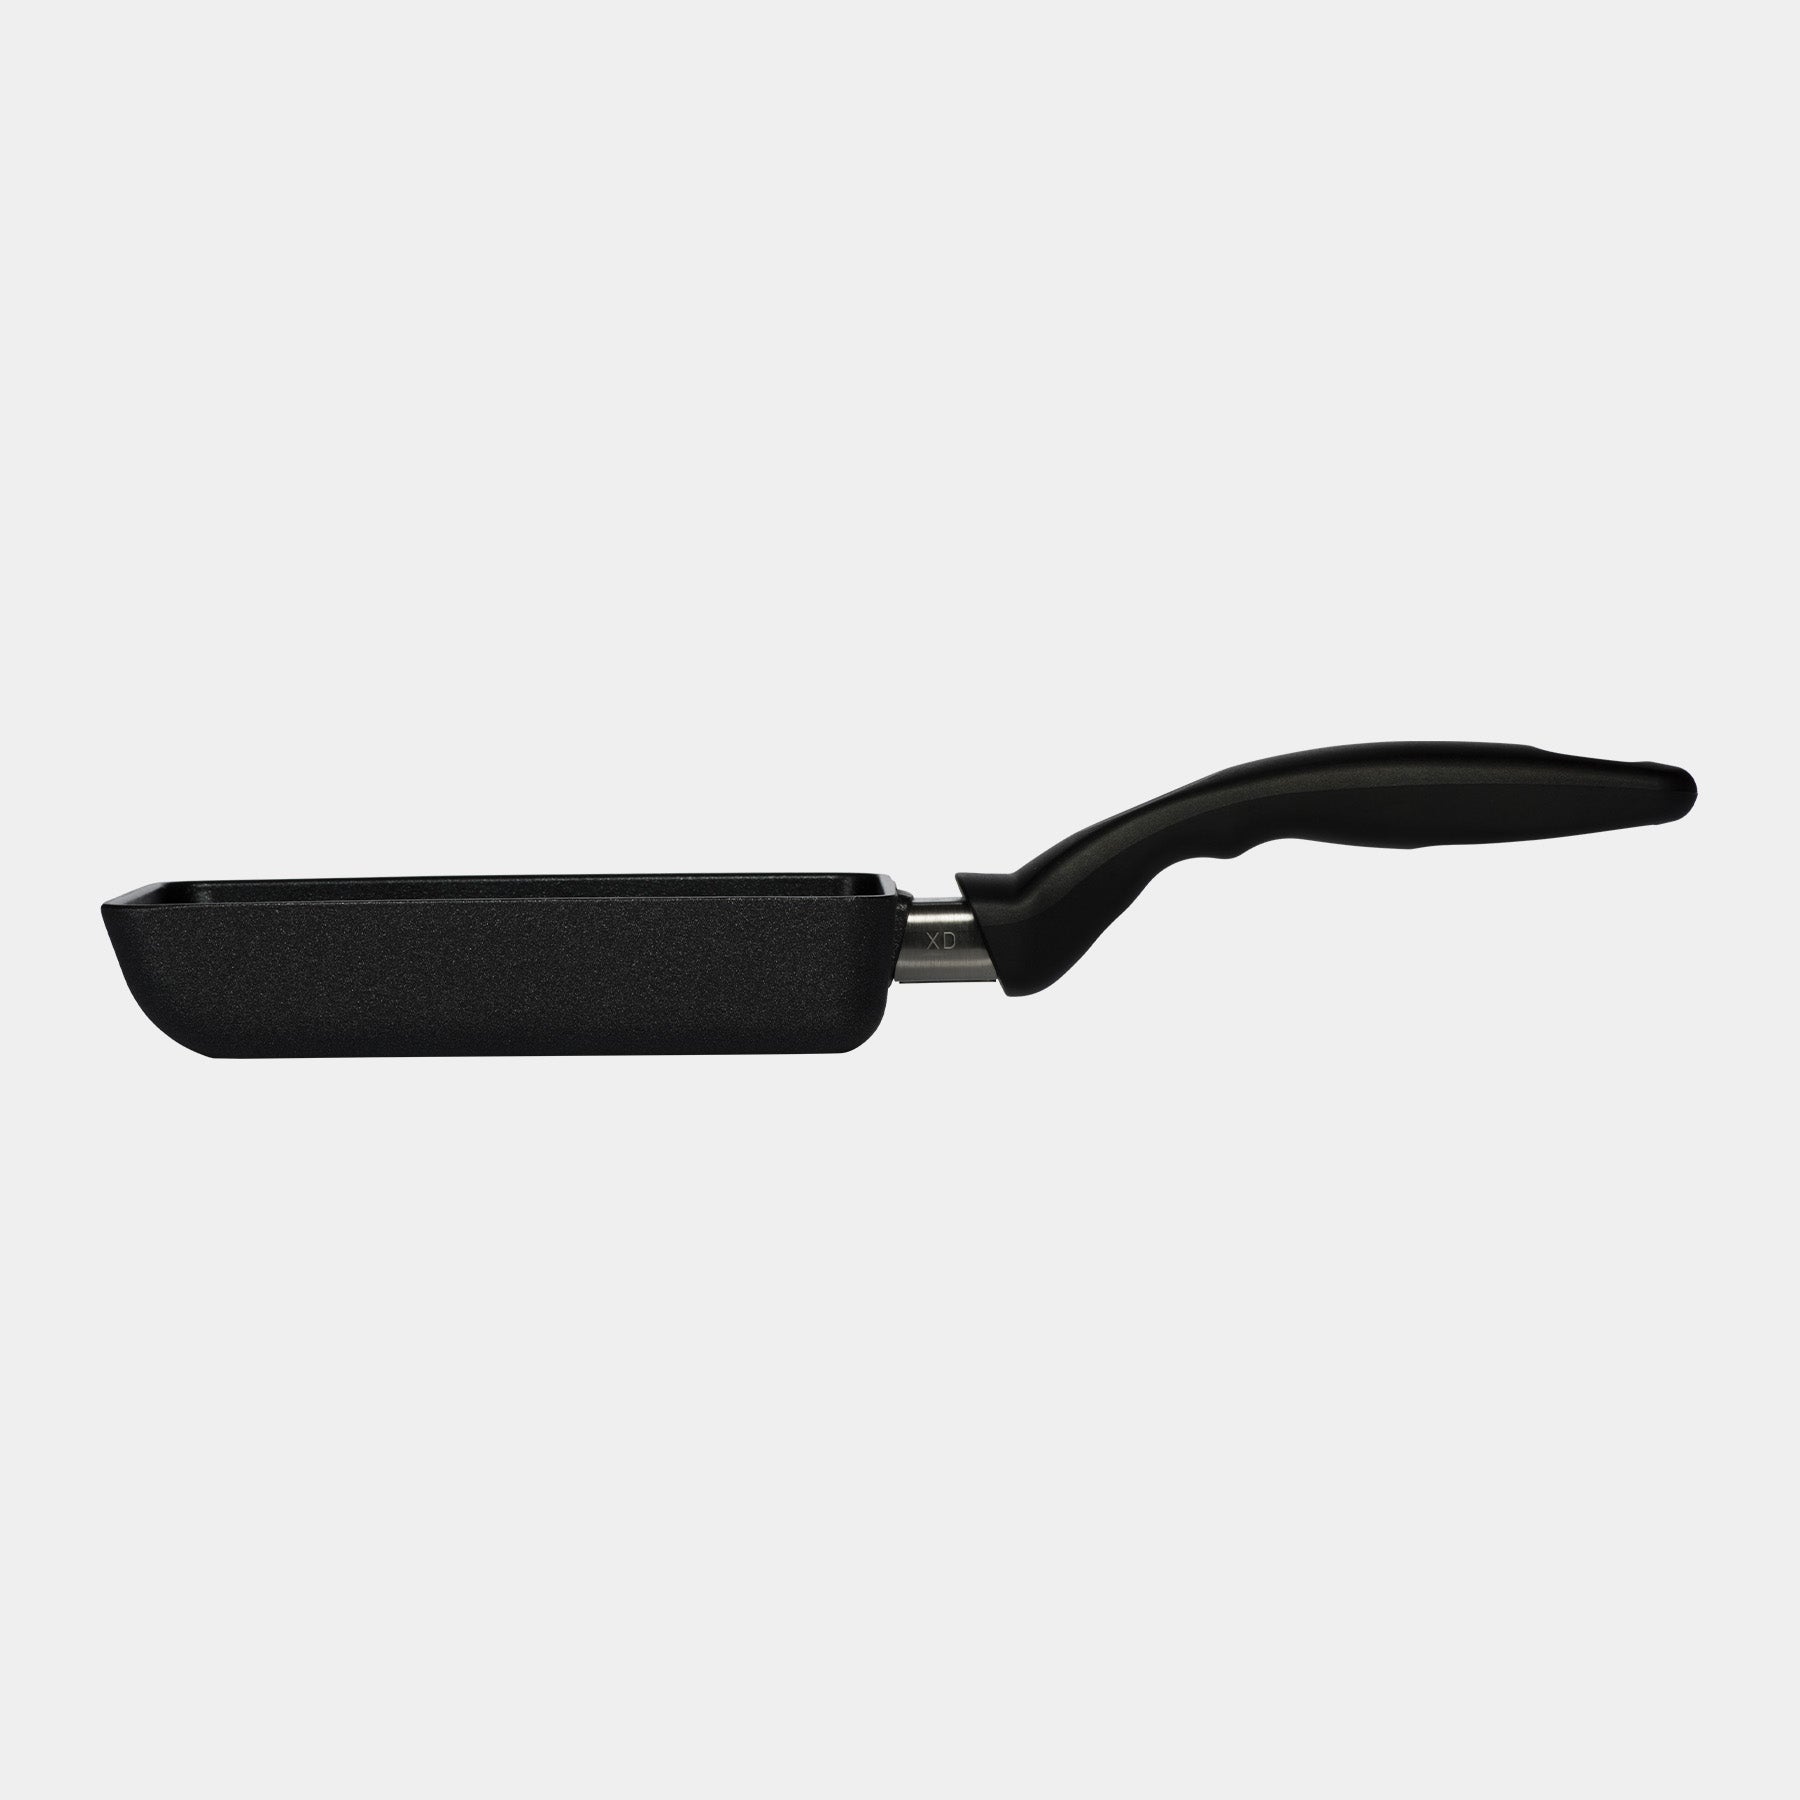 XD Nonstick 5" x 7" Japanese Omelet Pan - Induction - side view